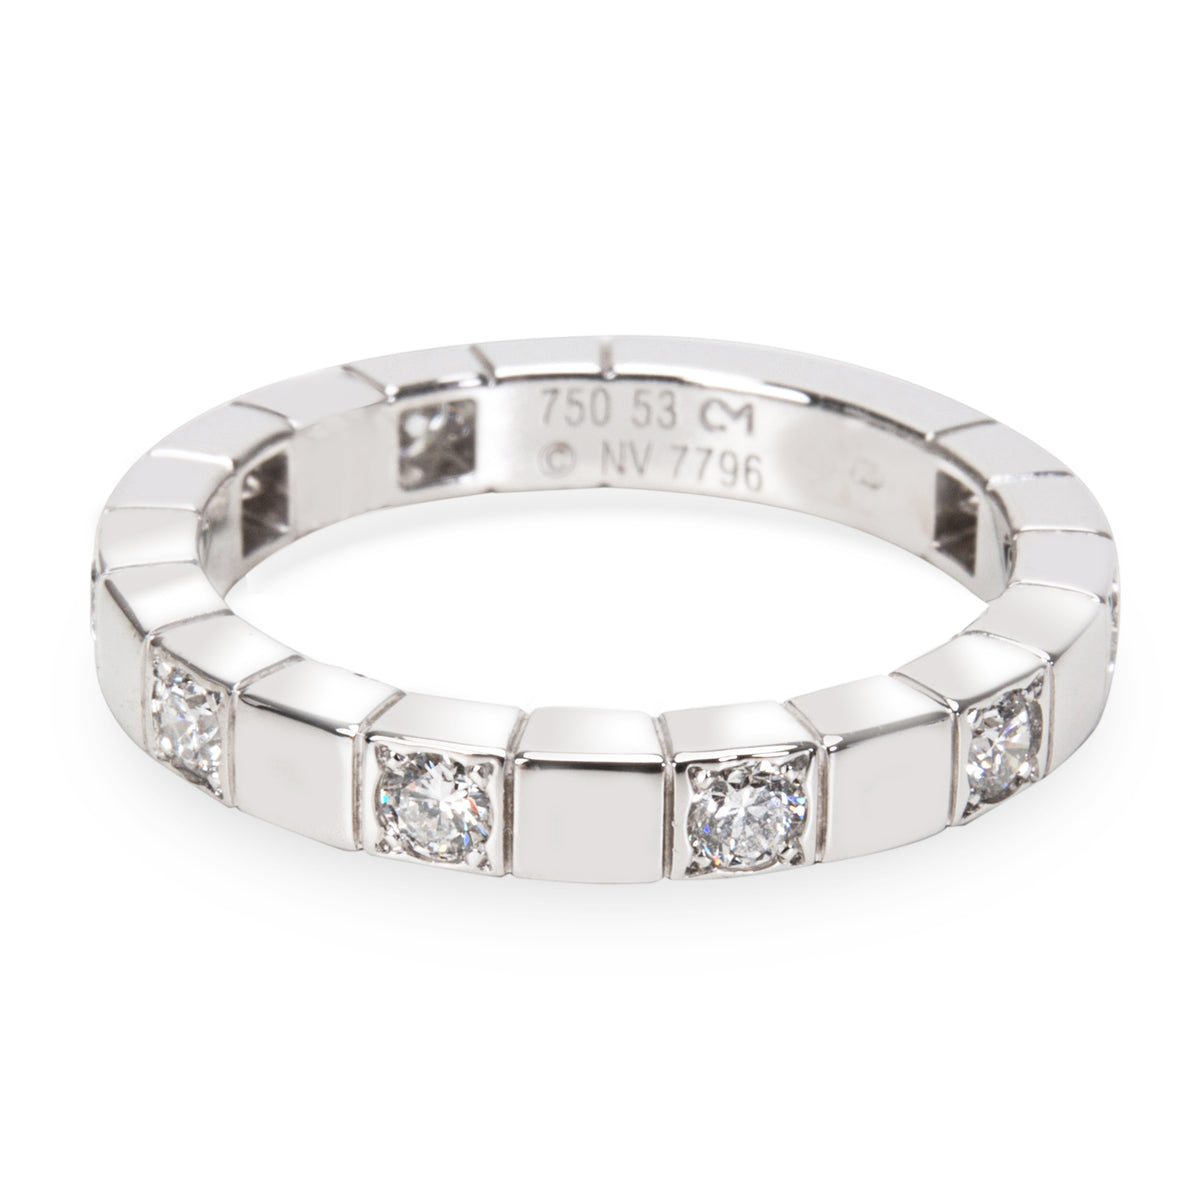 Cartier Lanieres Diamond Band in 18KT White Gold